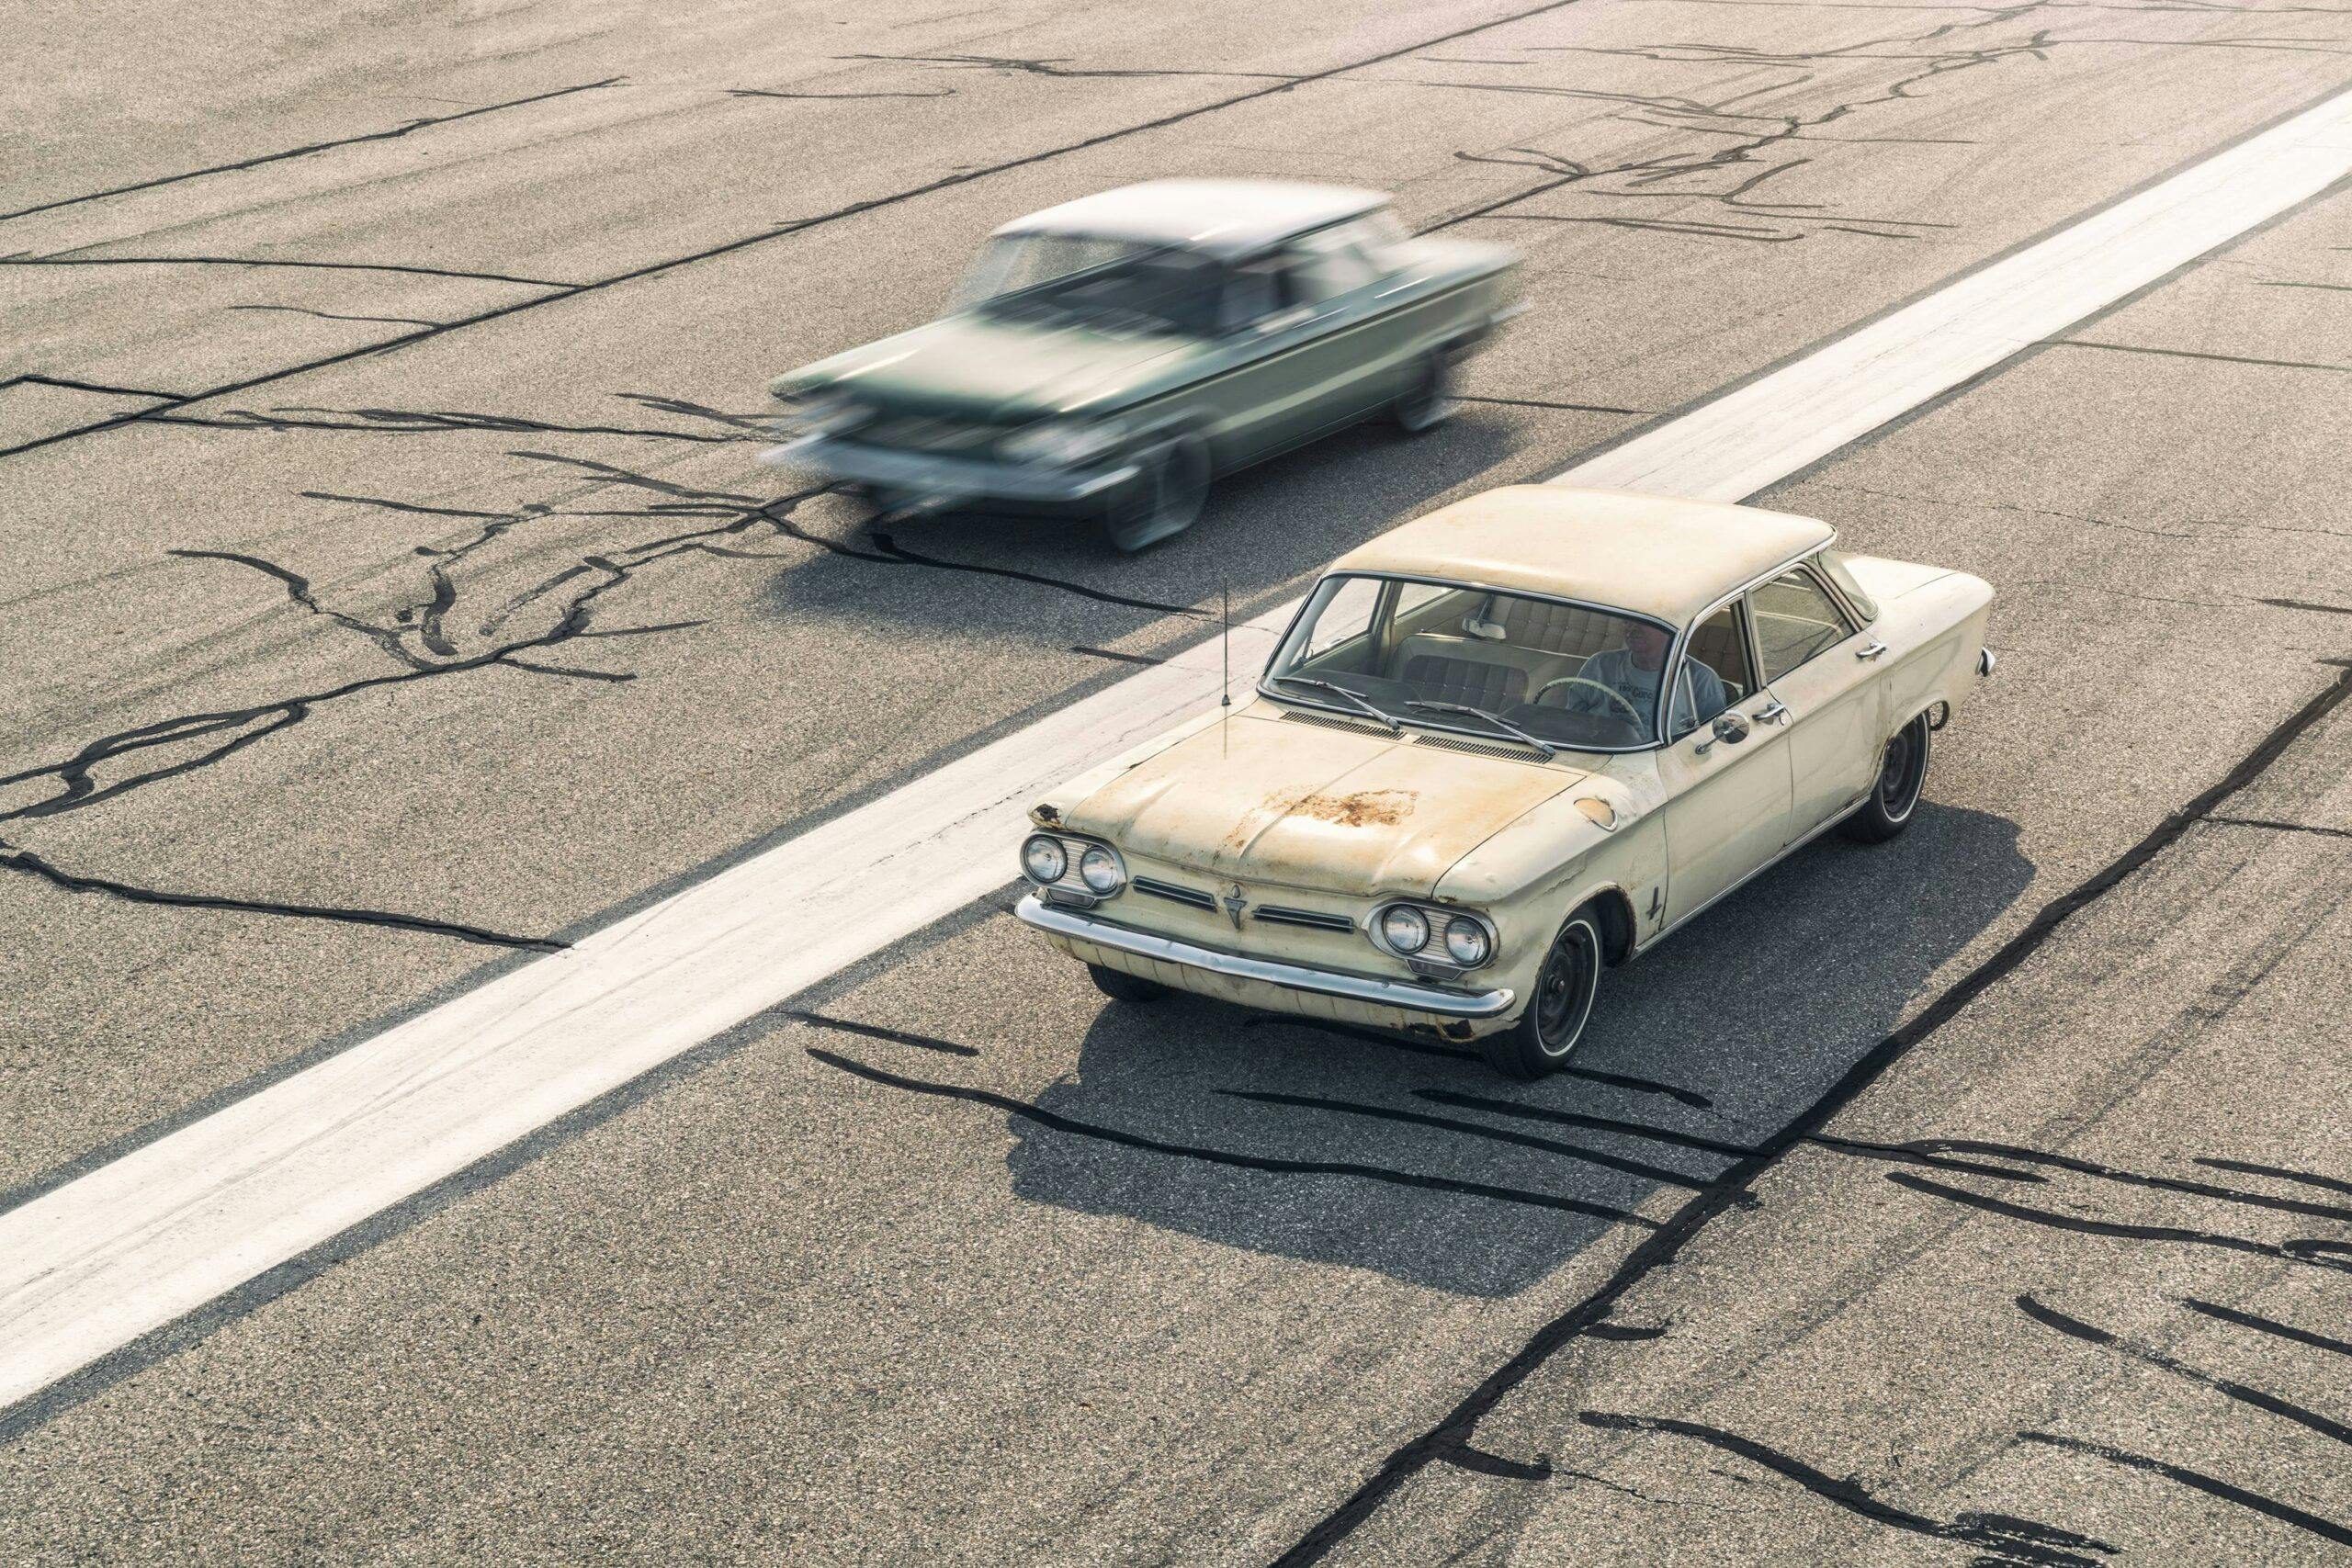 Chevrolet Corvair torture test airstrip track